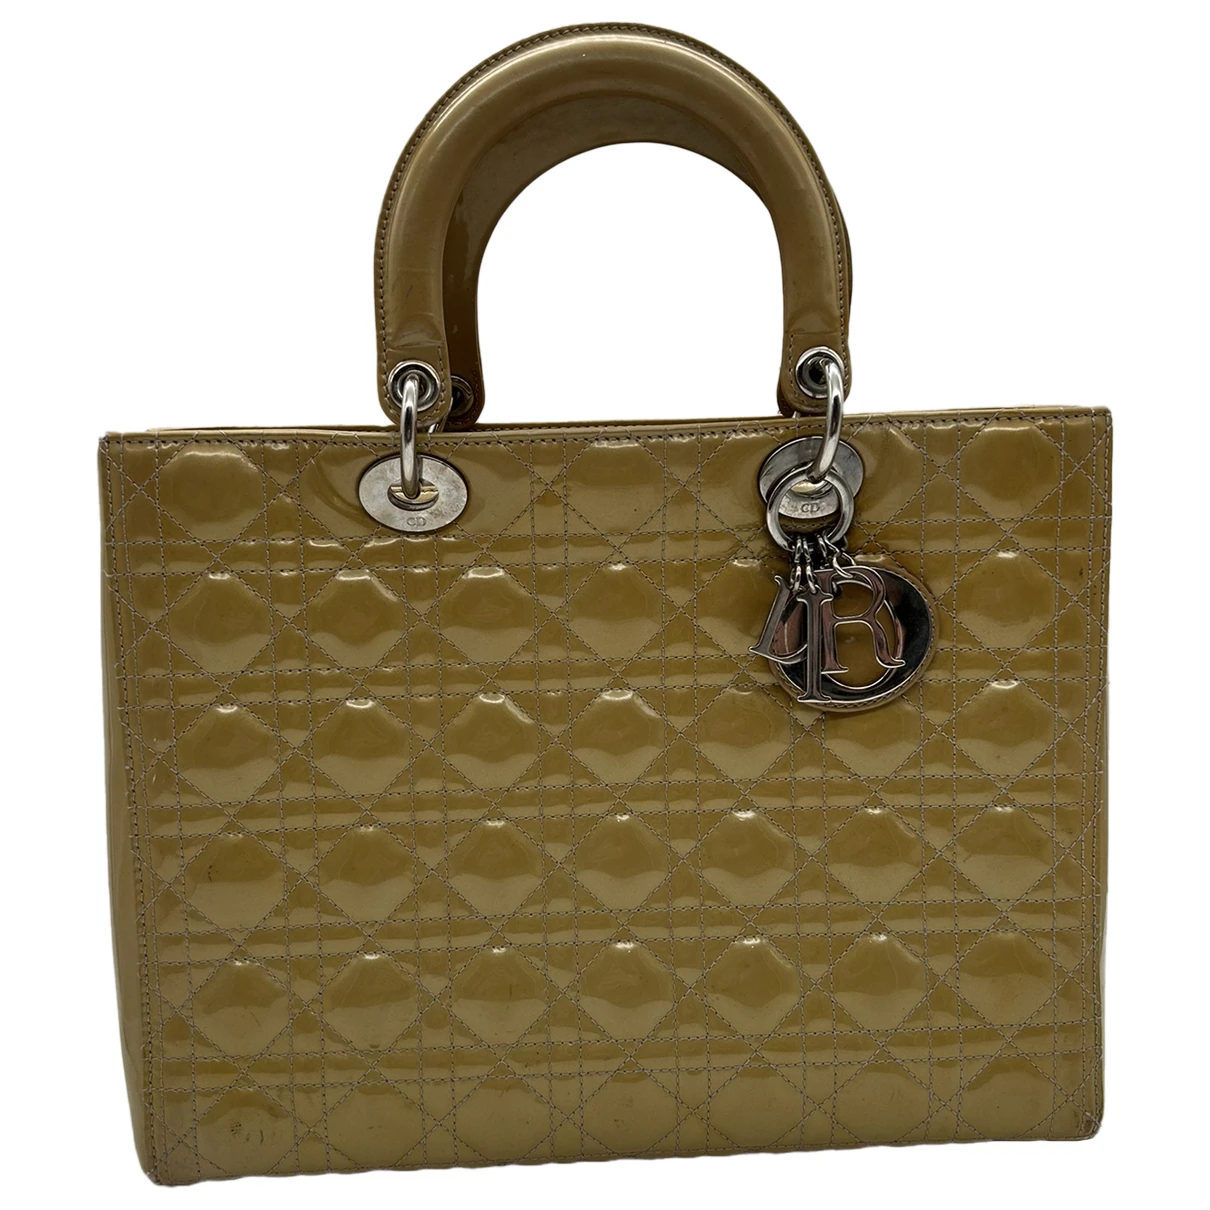 Pre-owned Dior Leather Handbag In Yellow